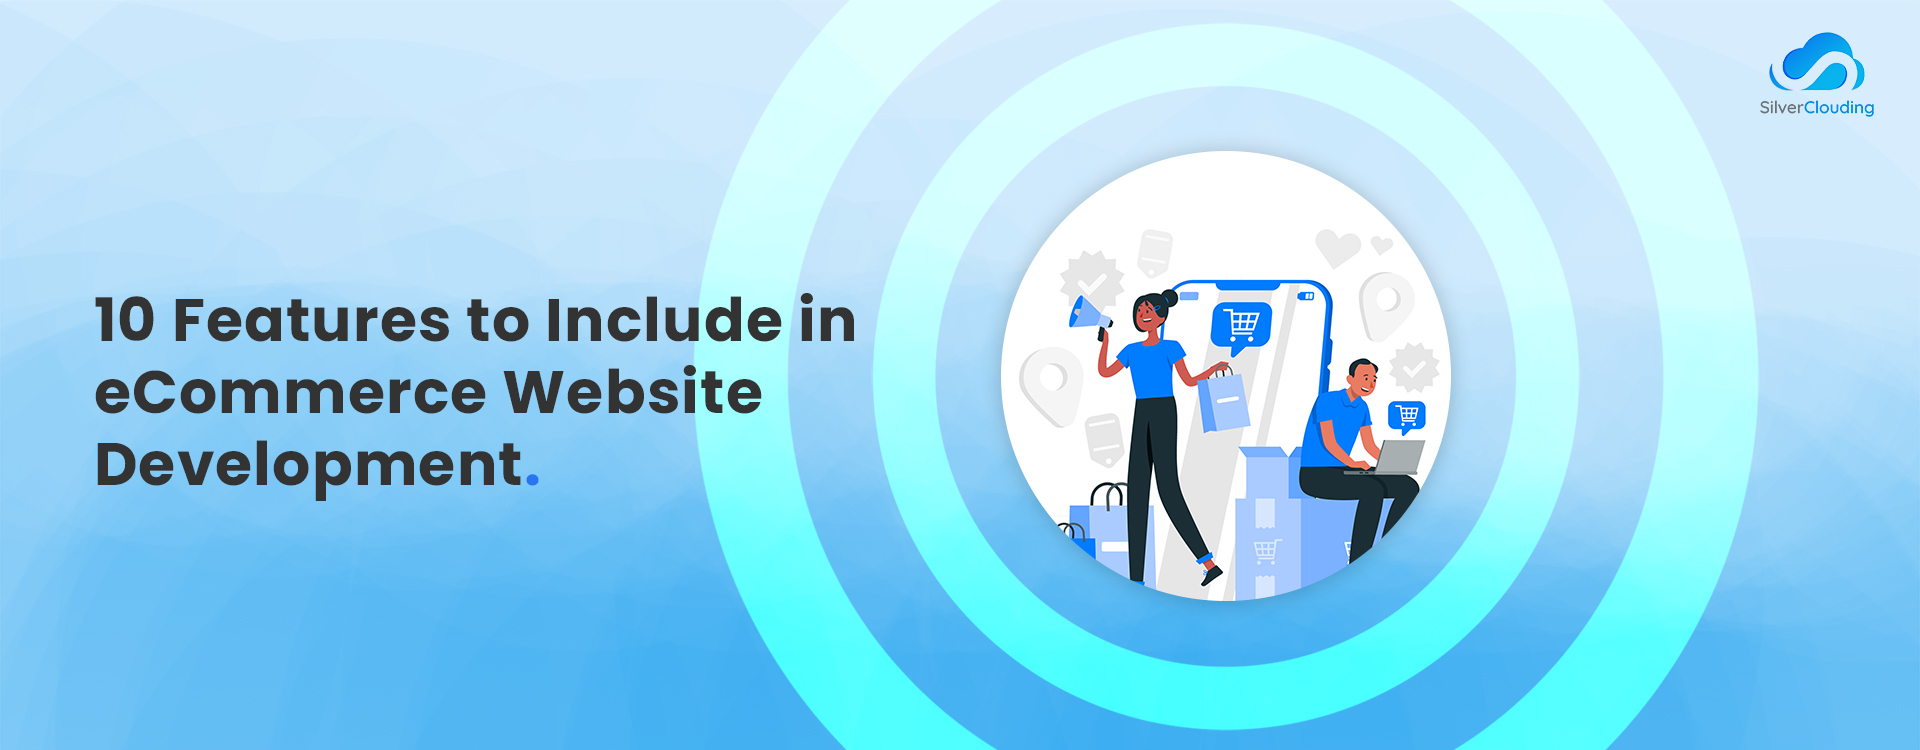 10 Features to Include in eCommerce Website Development